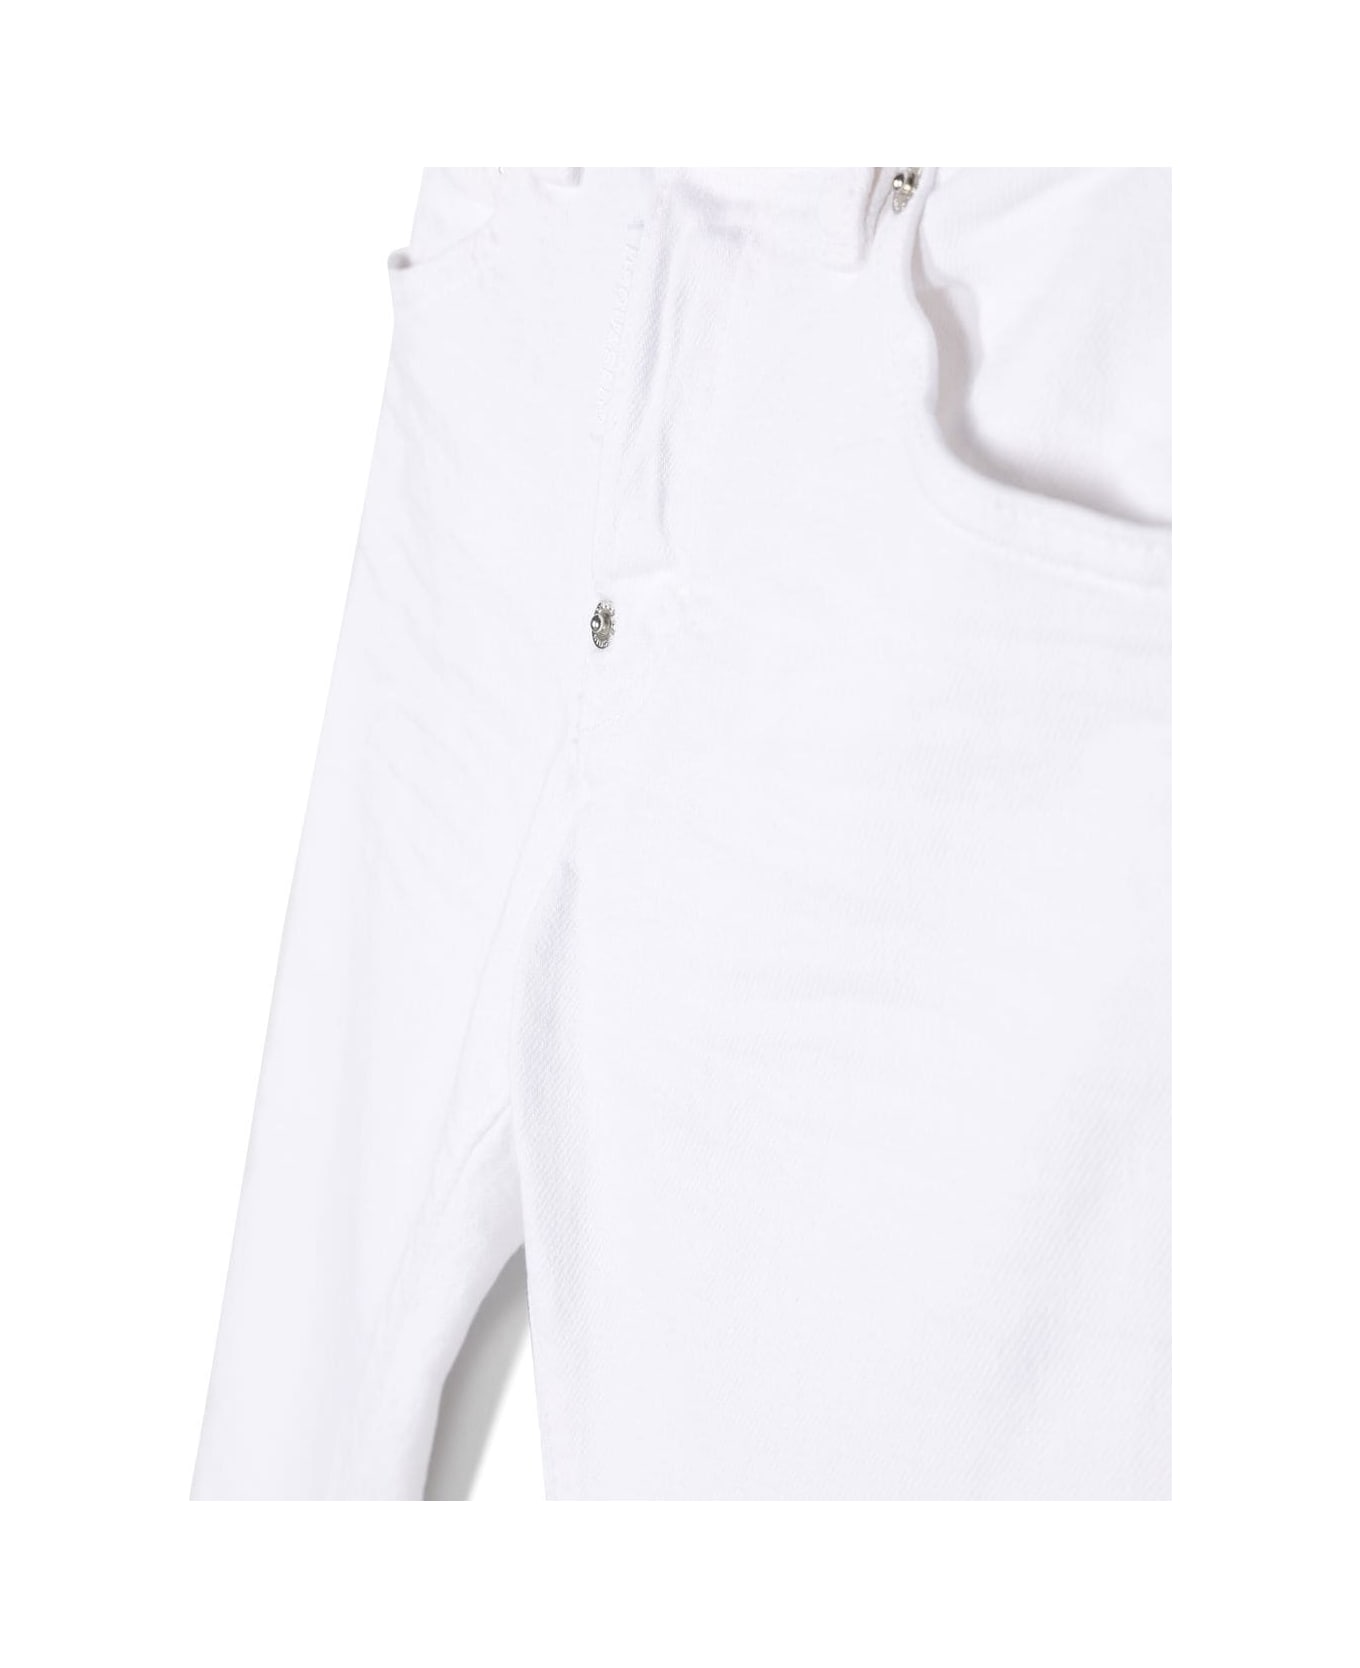 Dsquared2 Jeans With 5 Pockets - White ボトムス